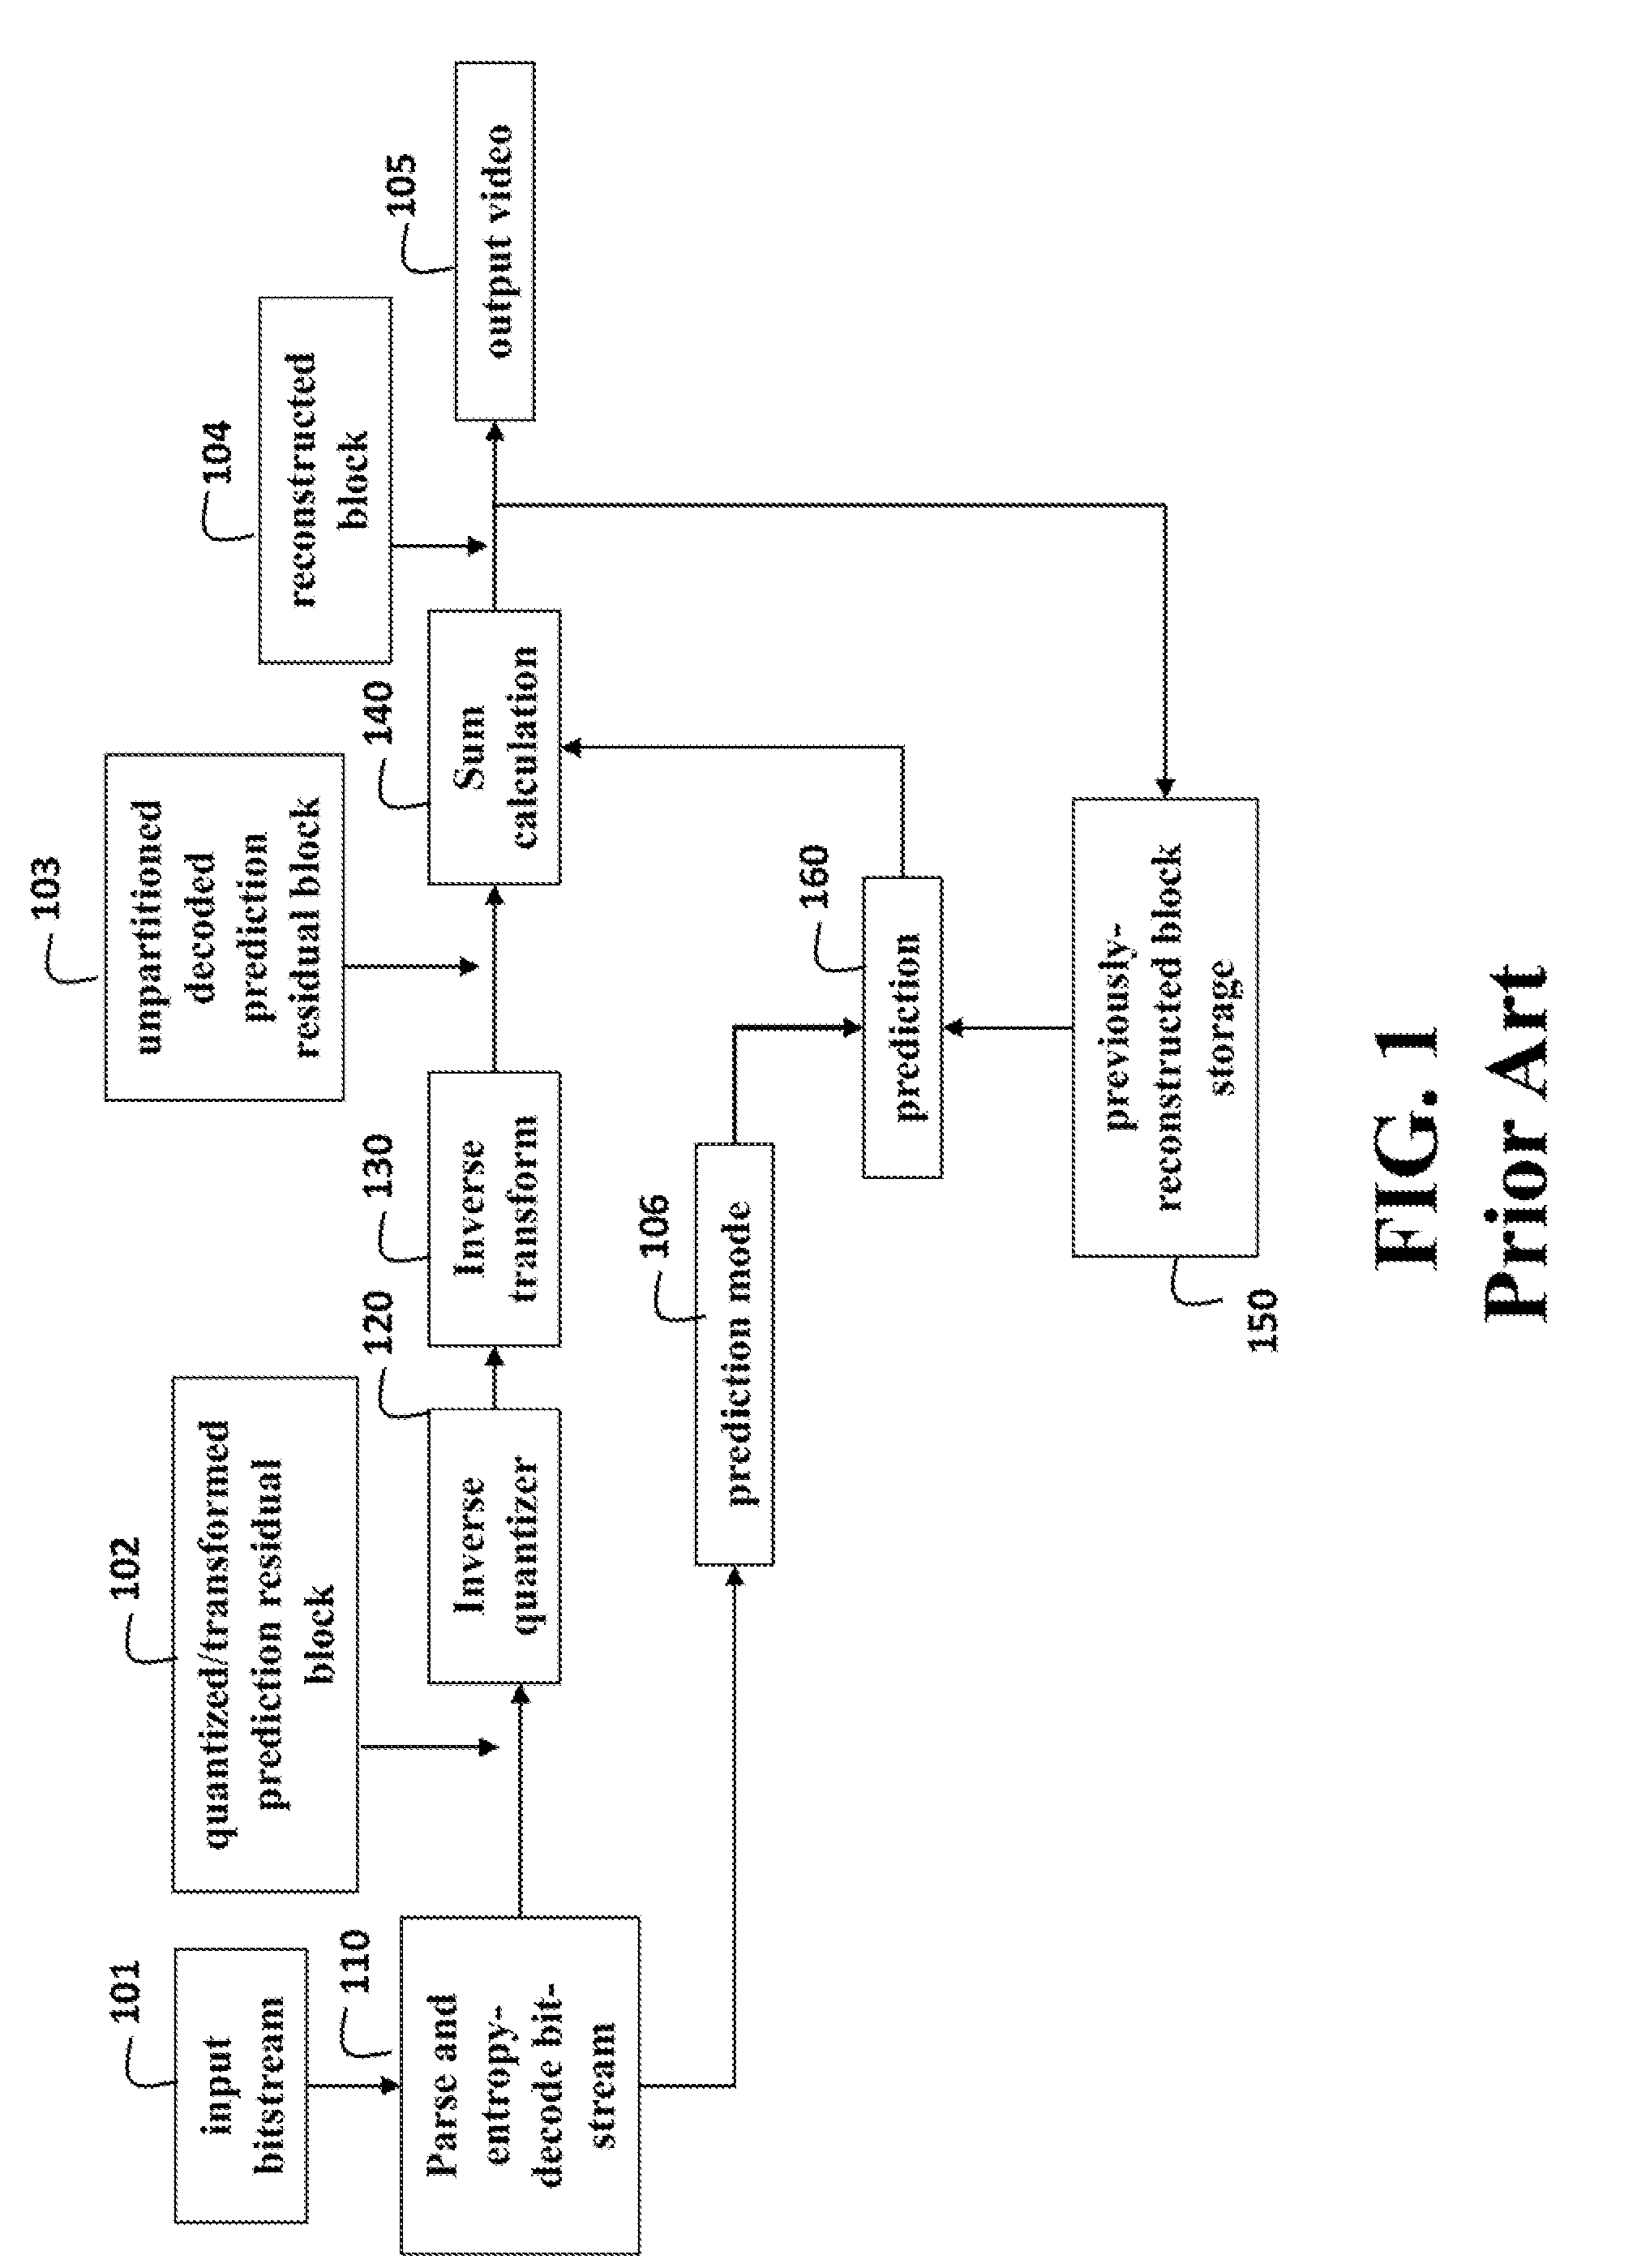 Method for Video Coding Using Blocks Partitioned According to Edge Orientations